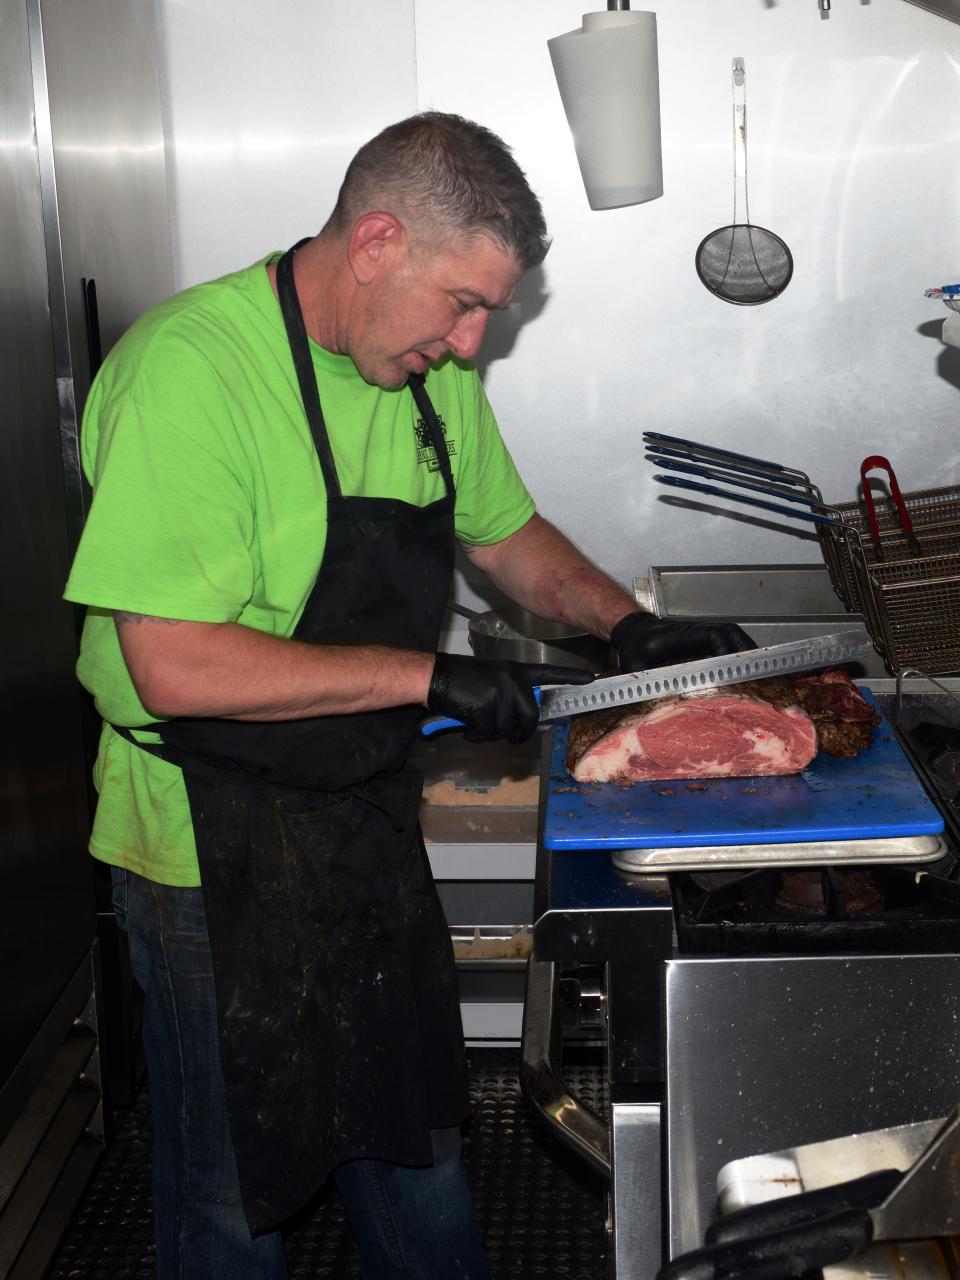 Chef Brian Waller, of the Horns, Fins & Feathers food truck, cuts prime rib during a stop on May 28 at Stone Crest Vineyard and Winery. The Zanesville-based business, registered in all 88 Ohio counties, specializes in fresh meat and seafood not often seen in food trucks. 